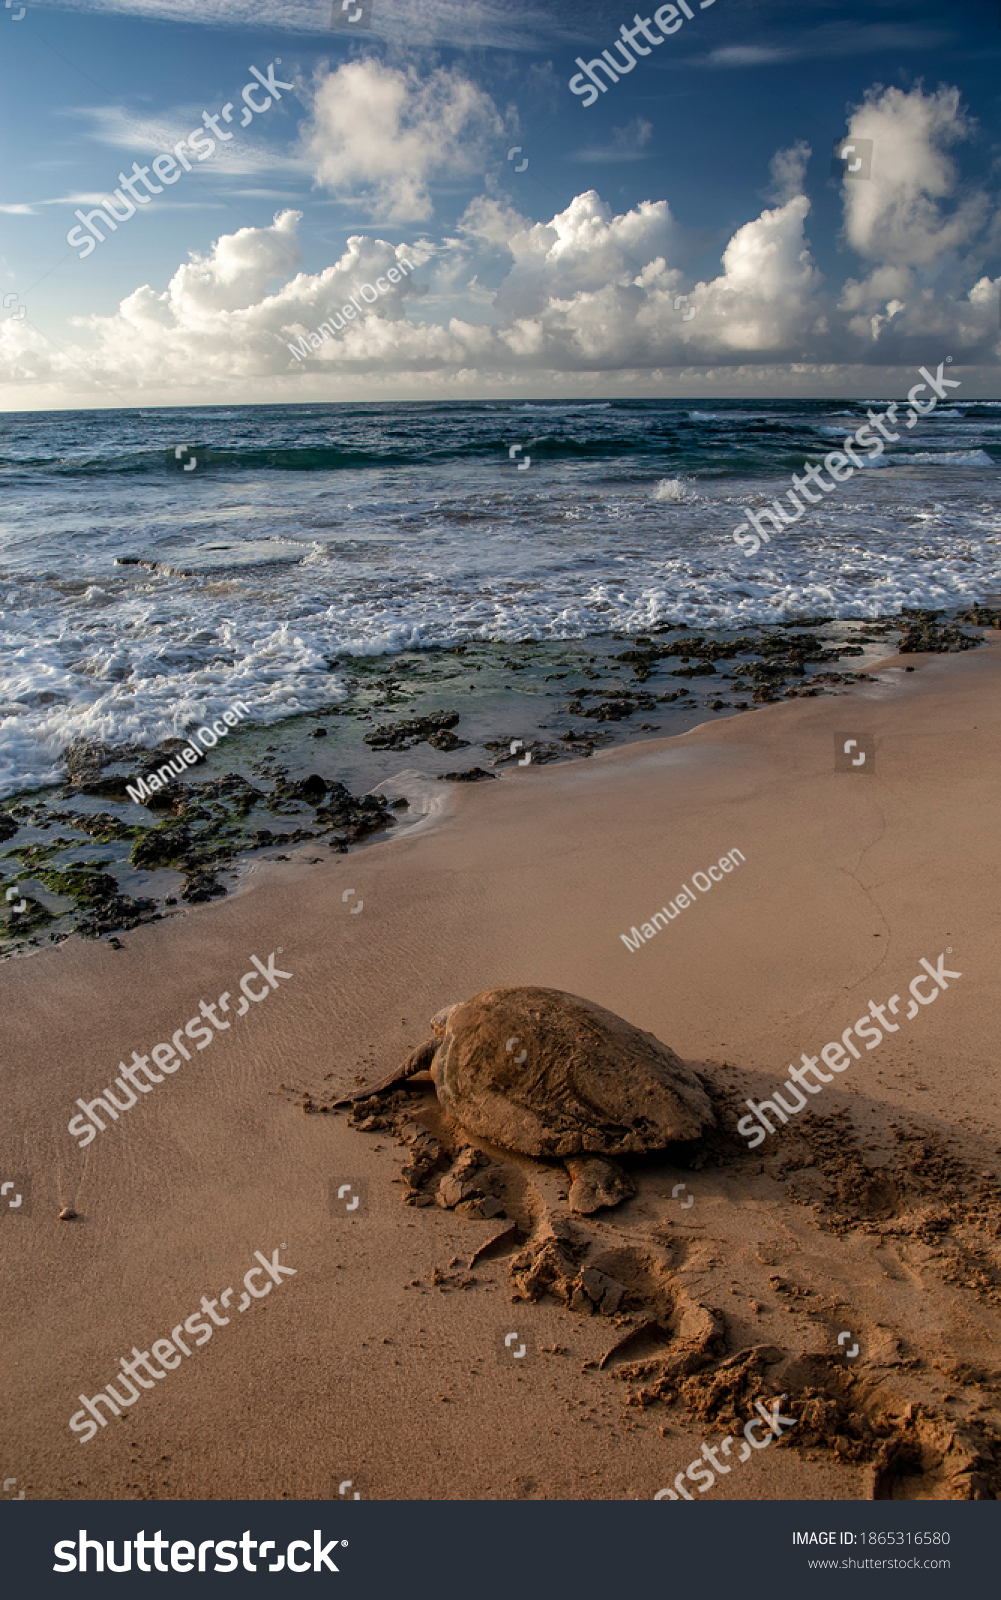 Loggerhead turtle after nesting in Boa Vista, Cape Verde, heads out to sea. #1865316580